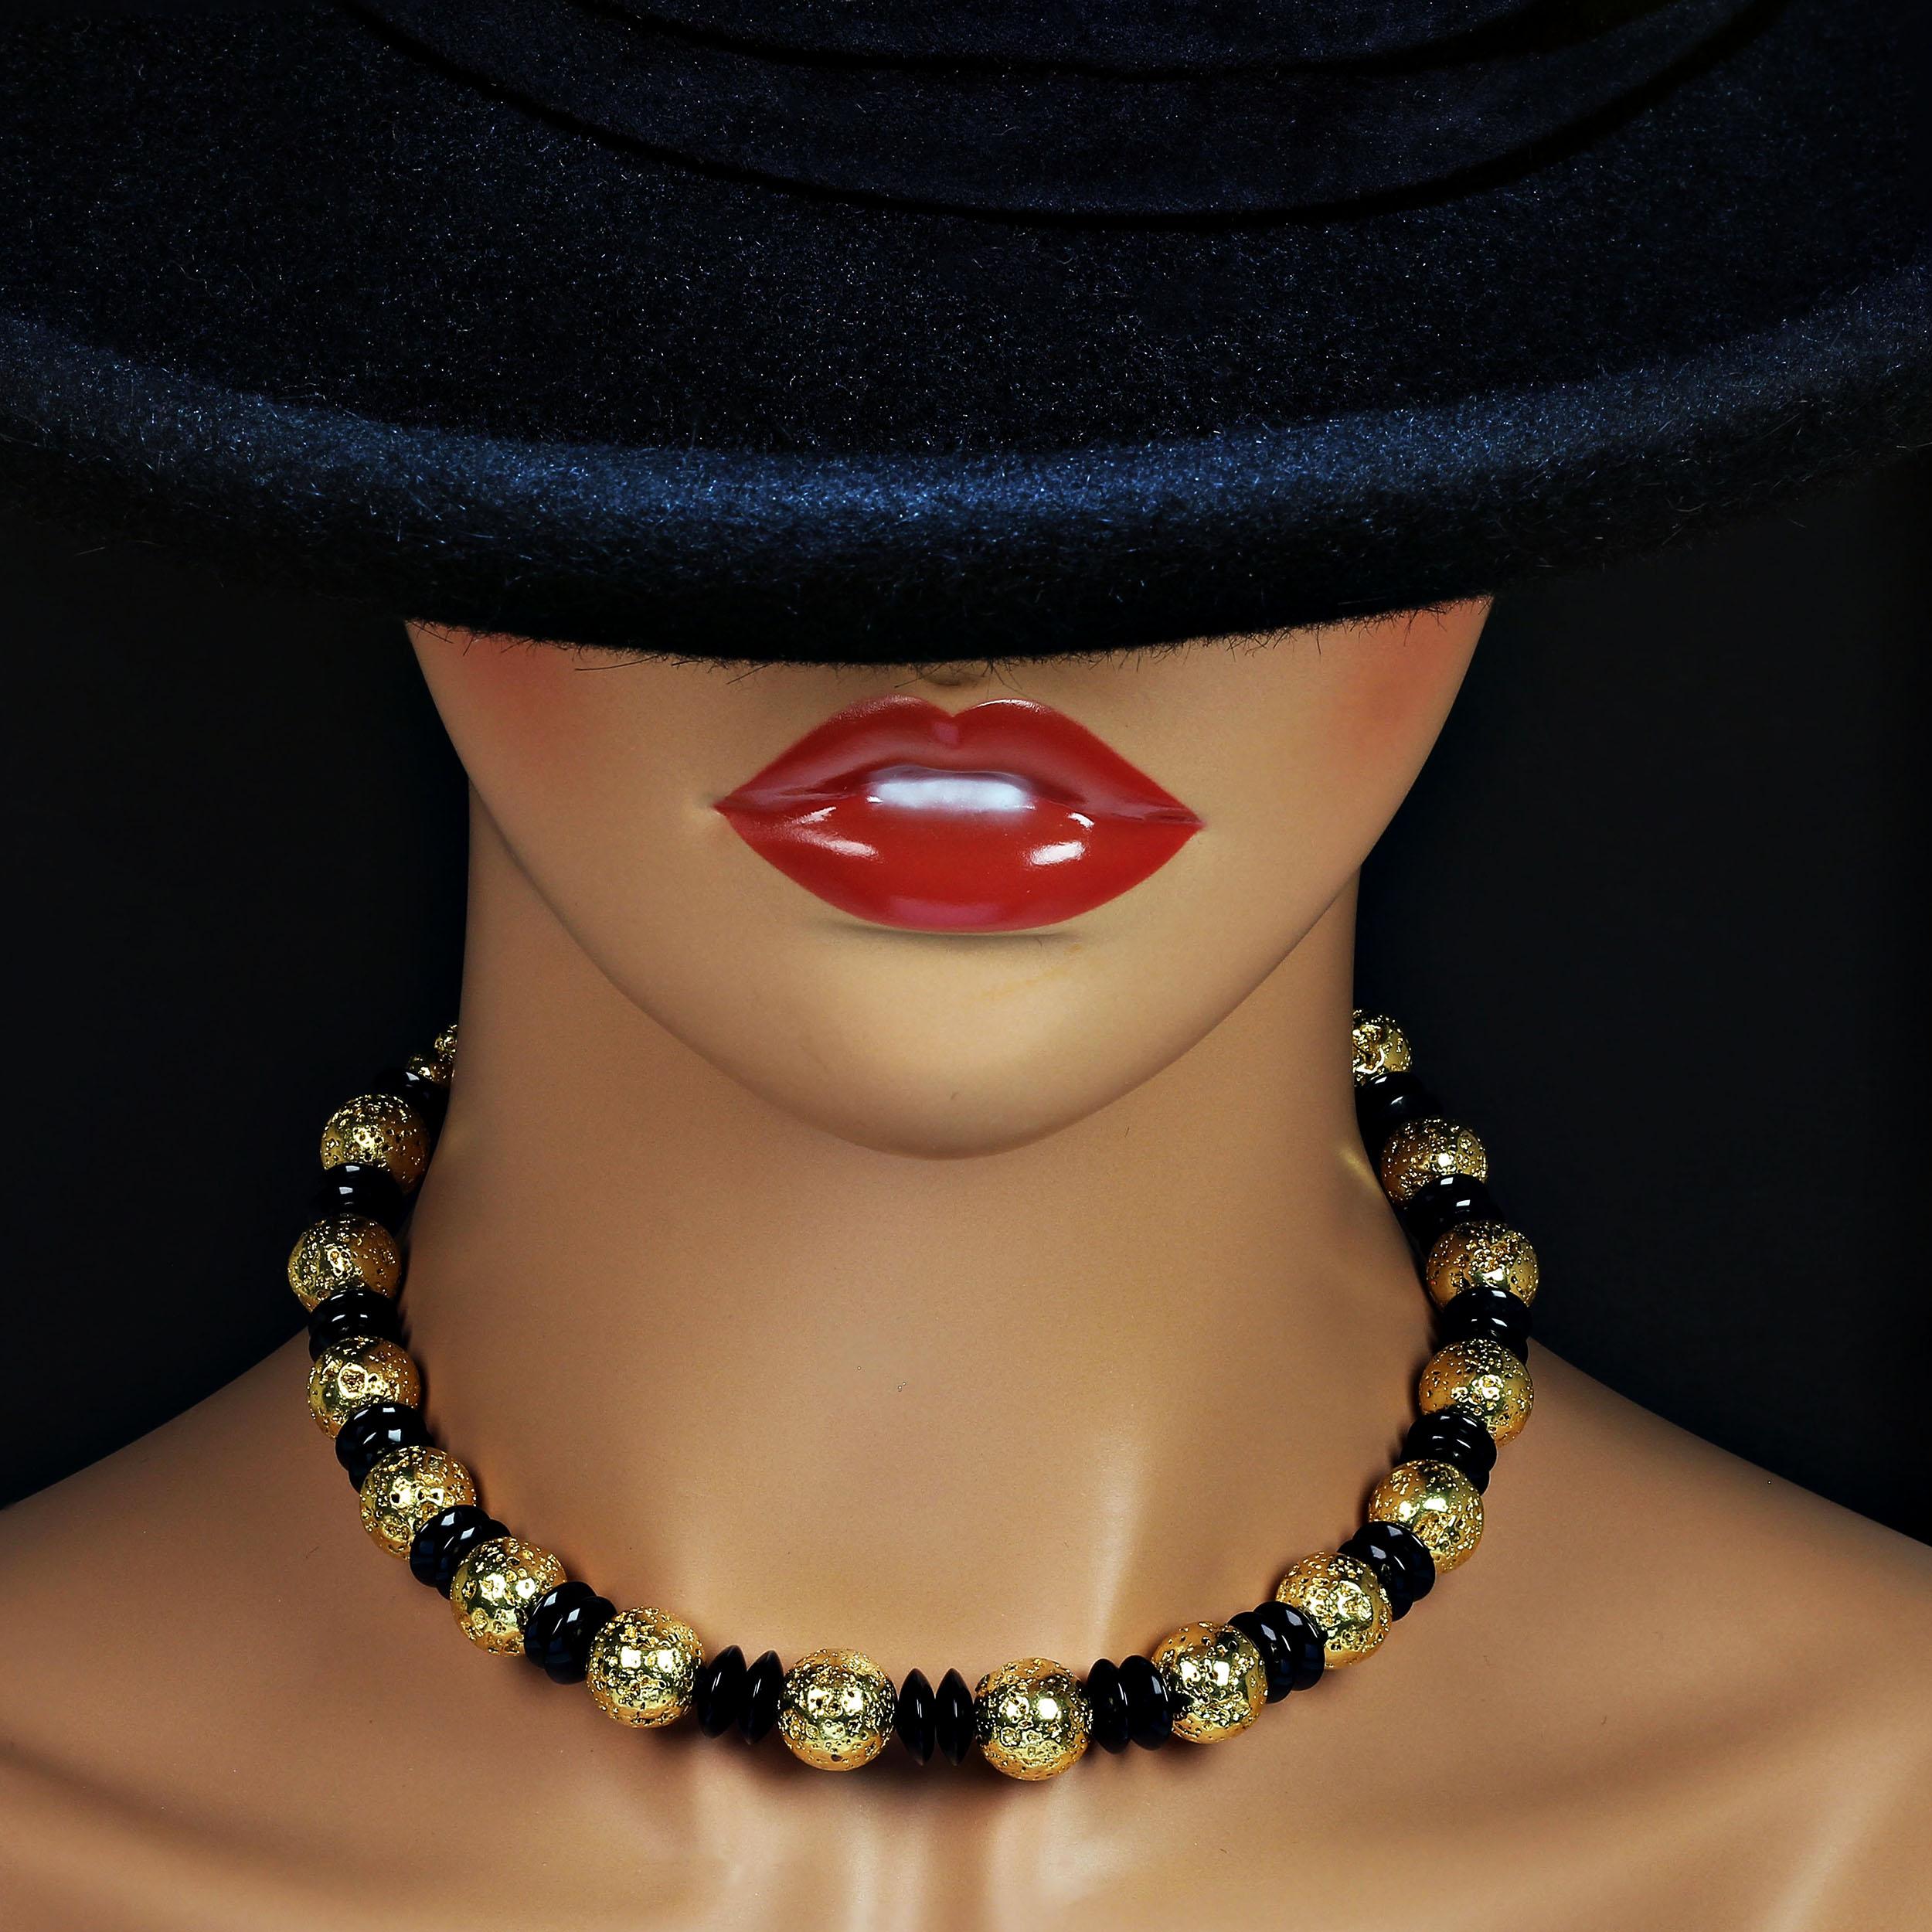 Handmade, 16 Inch necklace of gold wash over Lava rock and black Tourmaline rondelles. This elegant short necklace is great for evenings as well as daytime wear. The gold wash Lava rock is such a great look in combination with the highly polished